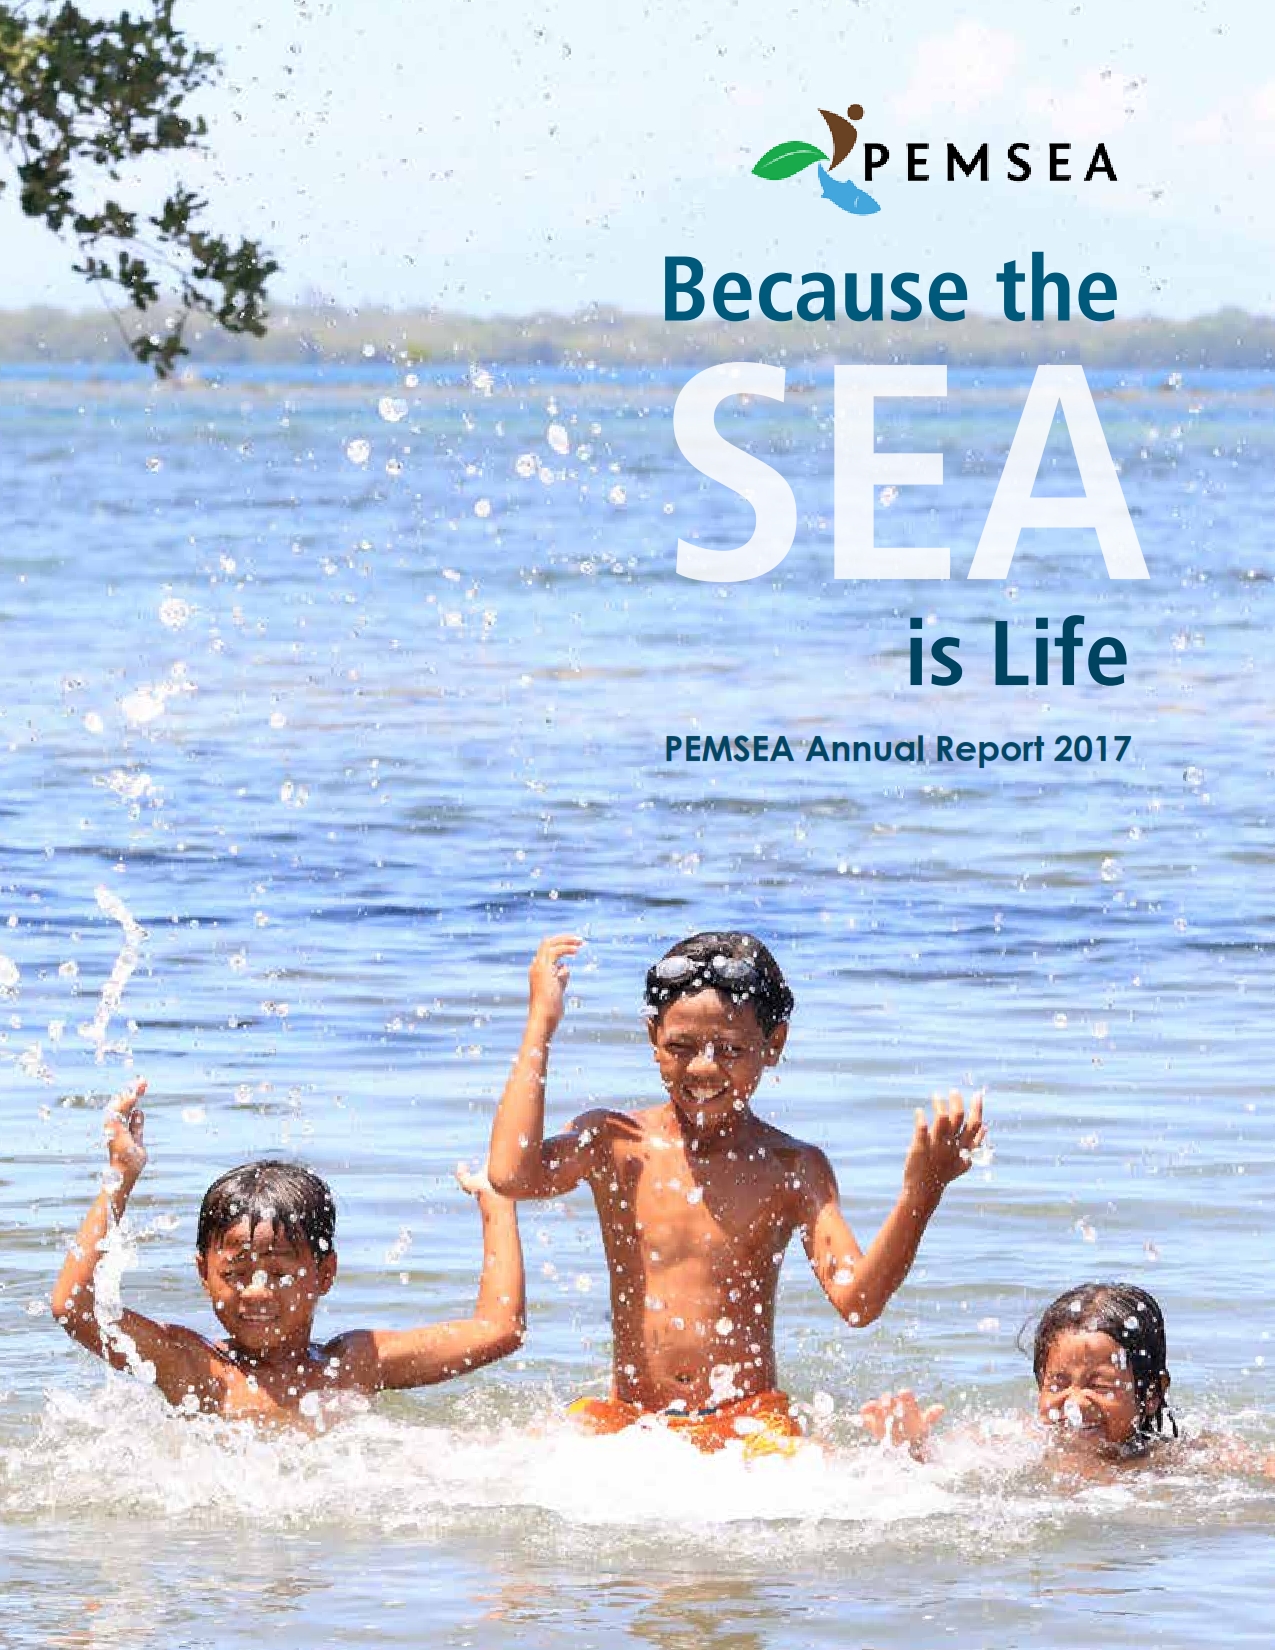 PEMSEA Annual Report 2017: Because the SEA is Life